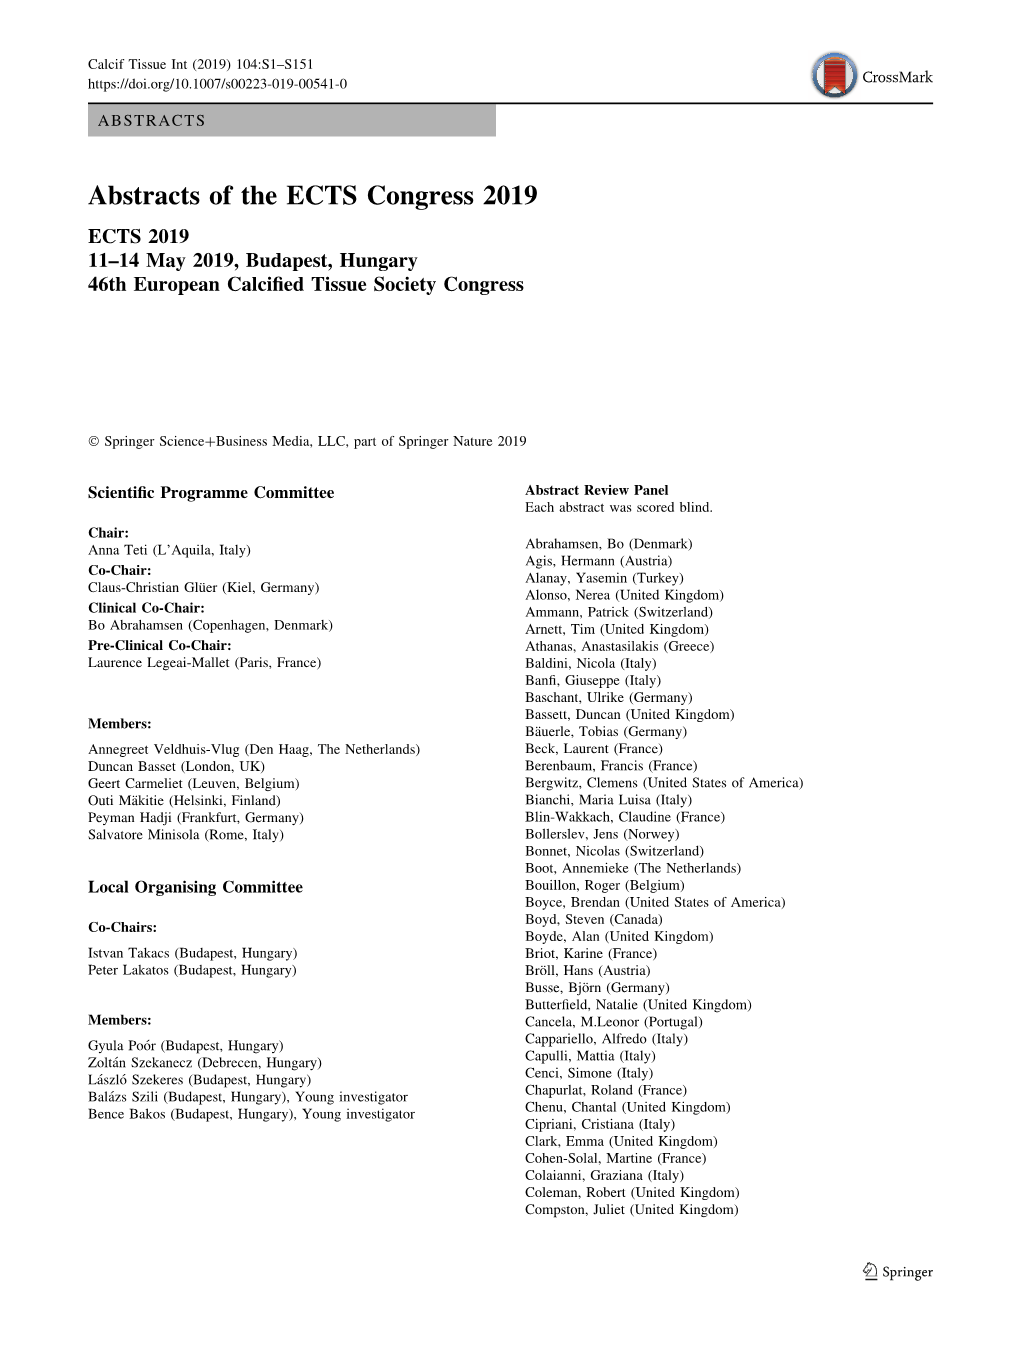 Abstracts of the ECTS Congress 2019 ECTS 2019 11–14 May 2019, Budapest, Hungary 46Th European Calciﬁed Tissue Society Congress